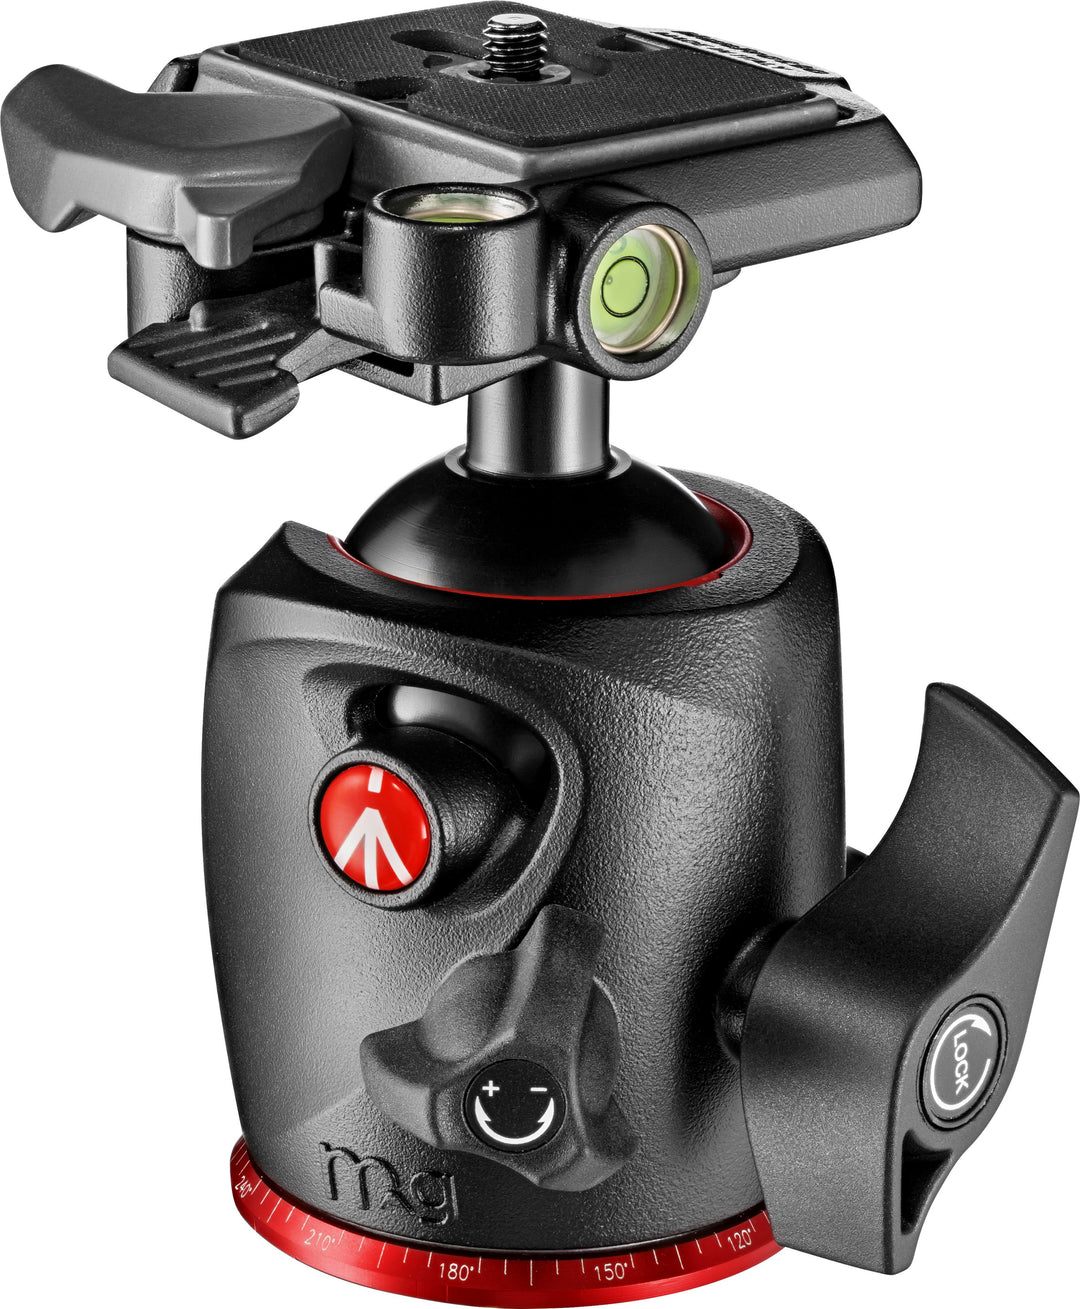 Manfrotto - MK055XPRO3-BHQ2 Aluminum Tripod with XPRO Ball Head and 200PL QR Plate_6